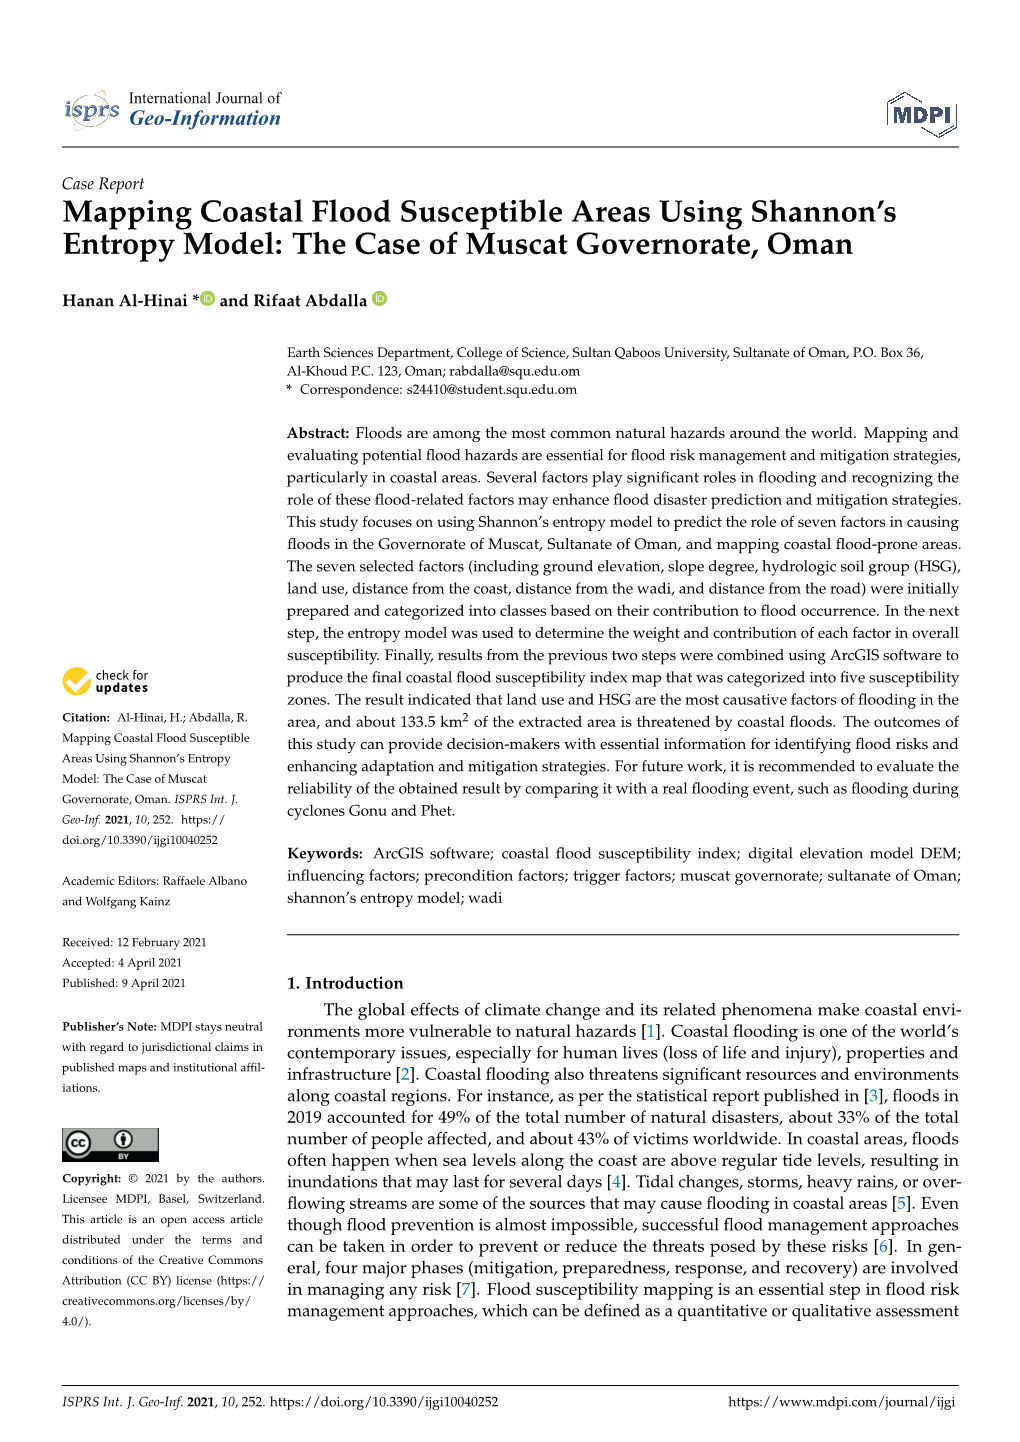 Mapping Coastal Flood Susceptible Areas Using Shannon's Entropy Model: the Case of Muscat Governorate, Oman